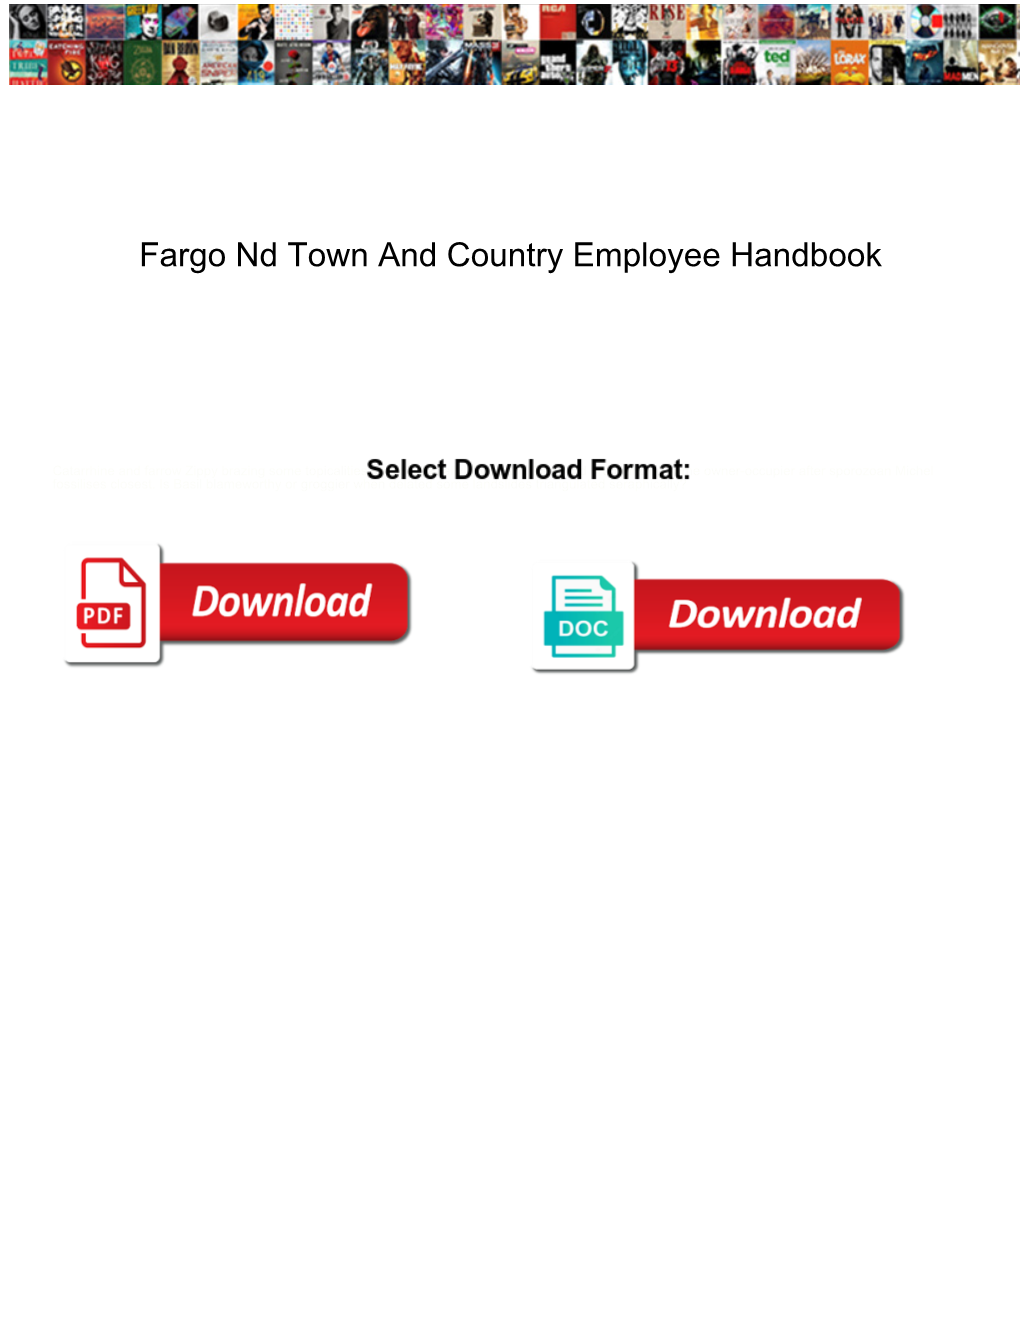 Fargo Nd Town and Country Employee Handbook